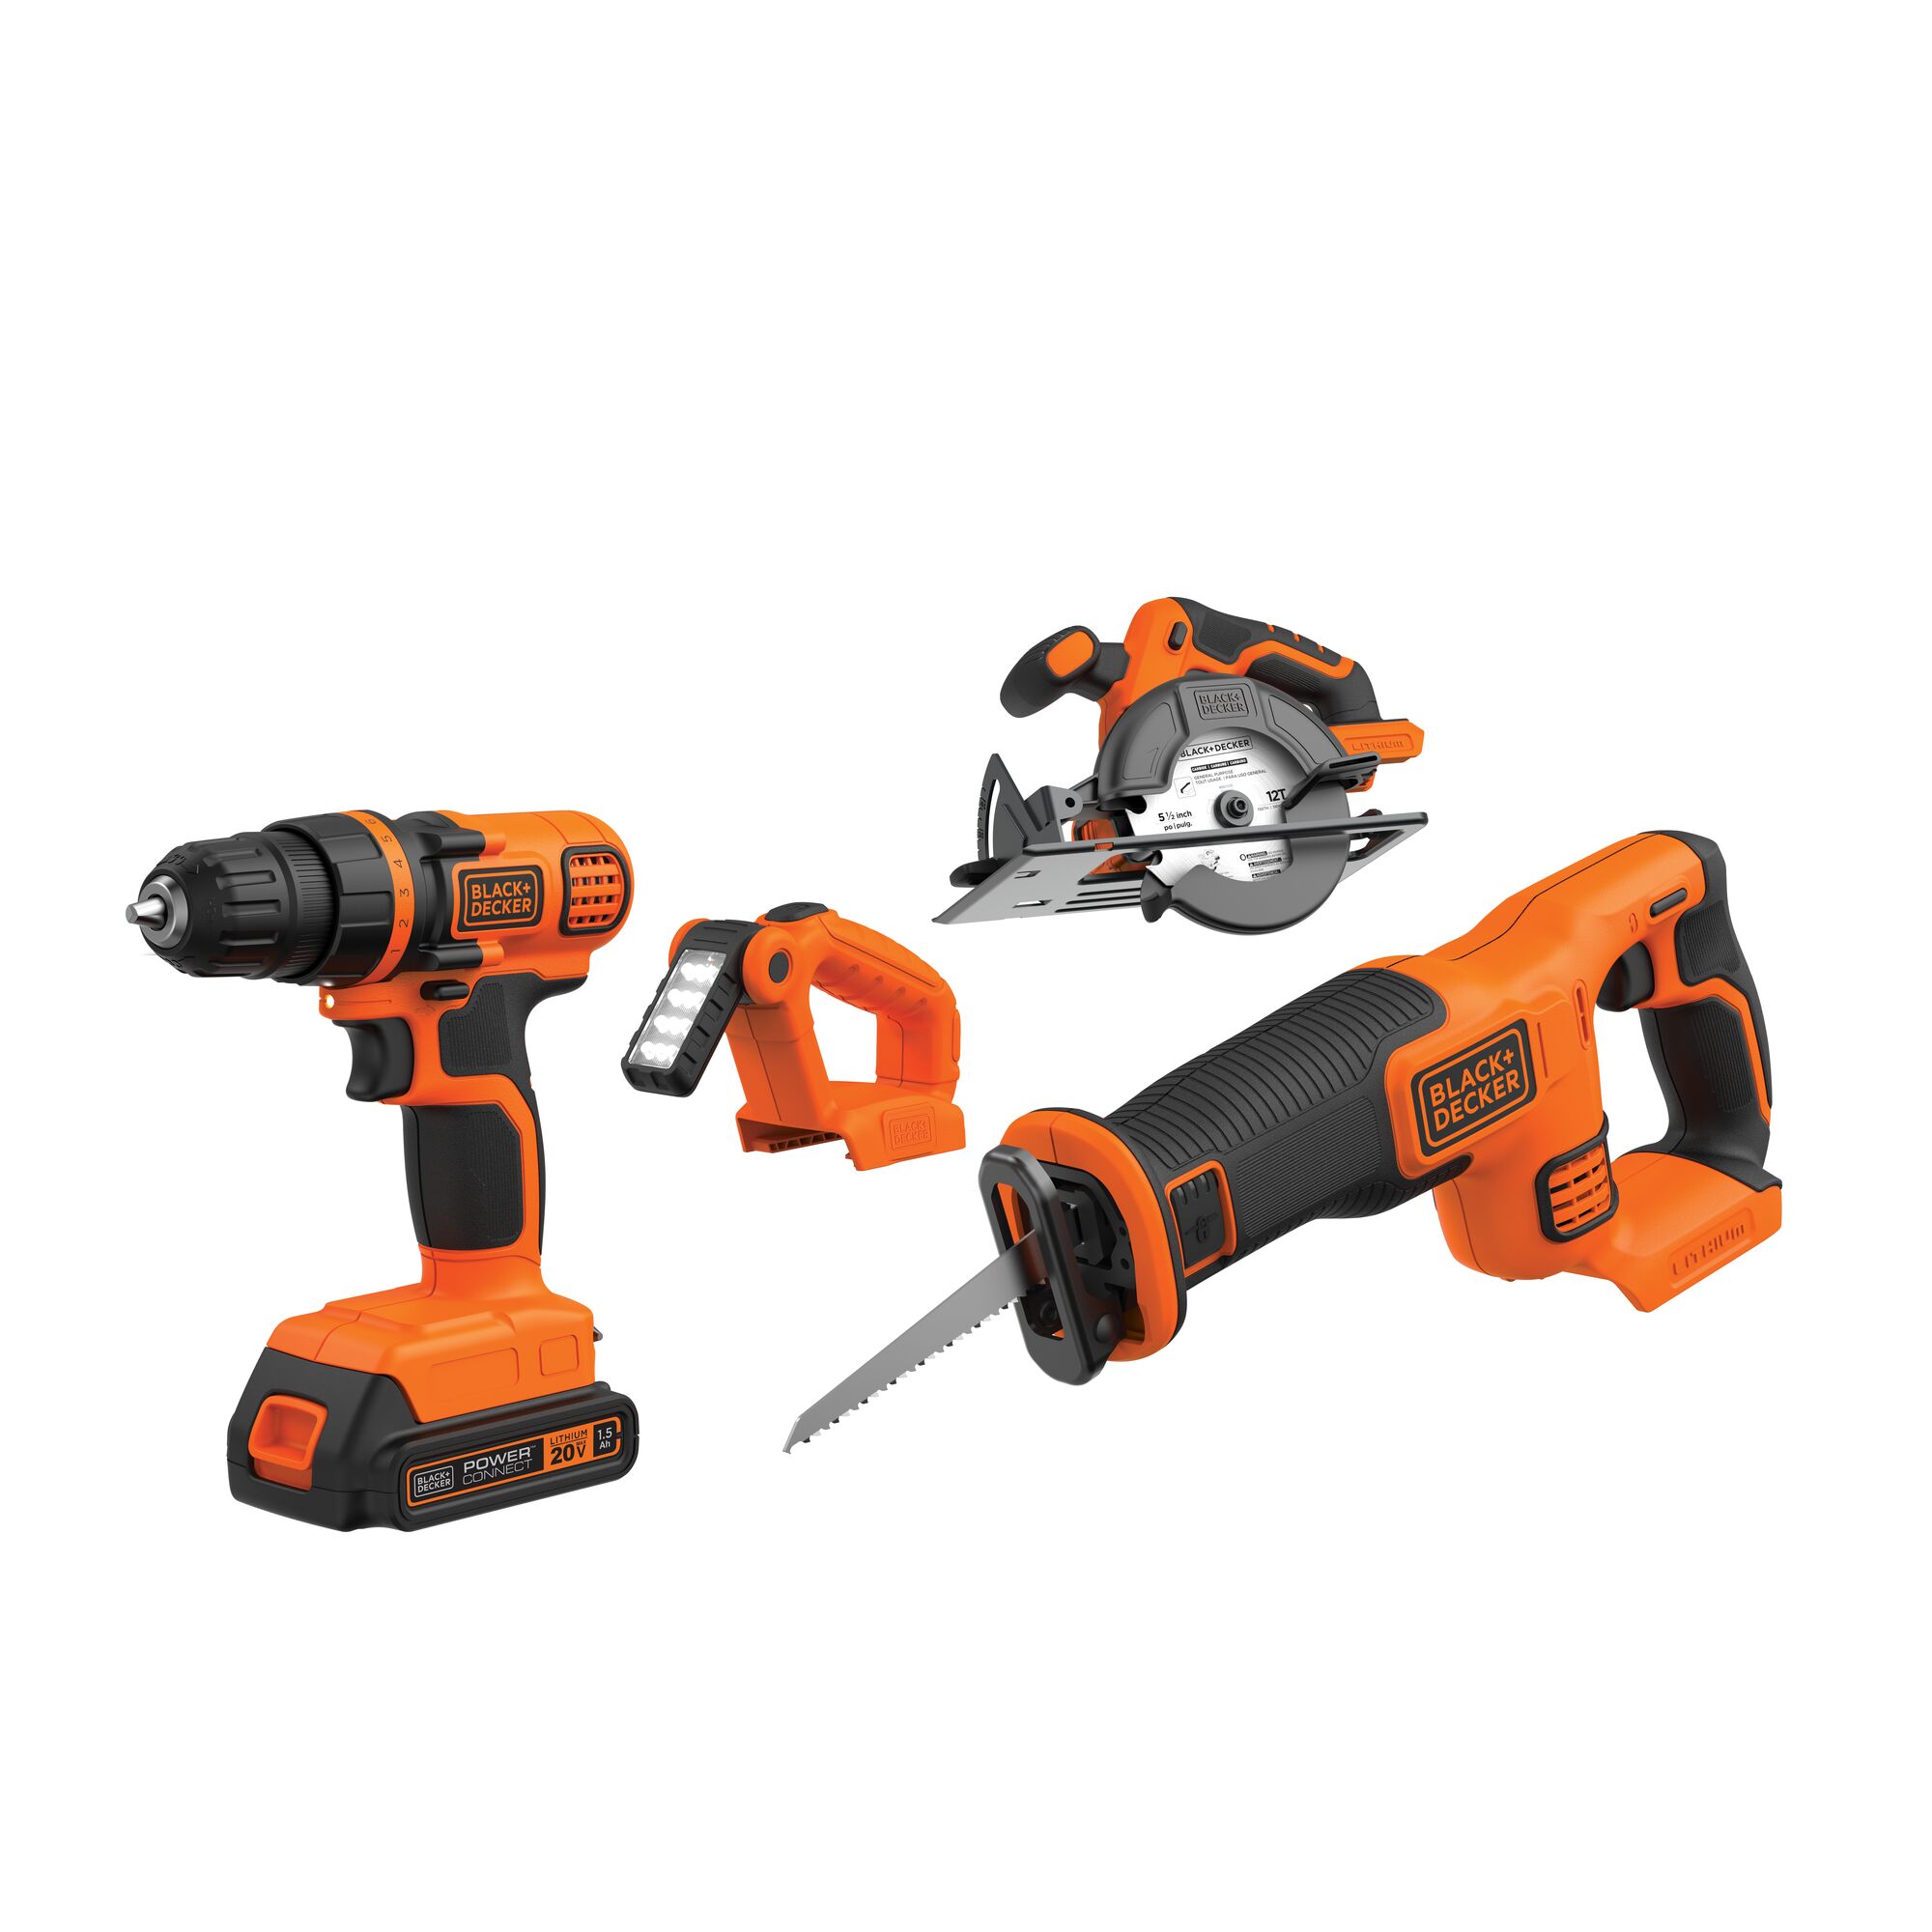 Lithium ion 4 tool combo kit drill / driver circular saw reciprocating saw and work light.